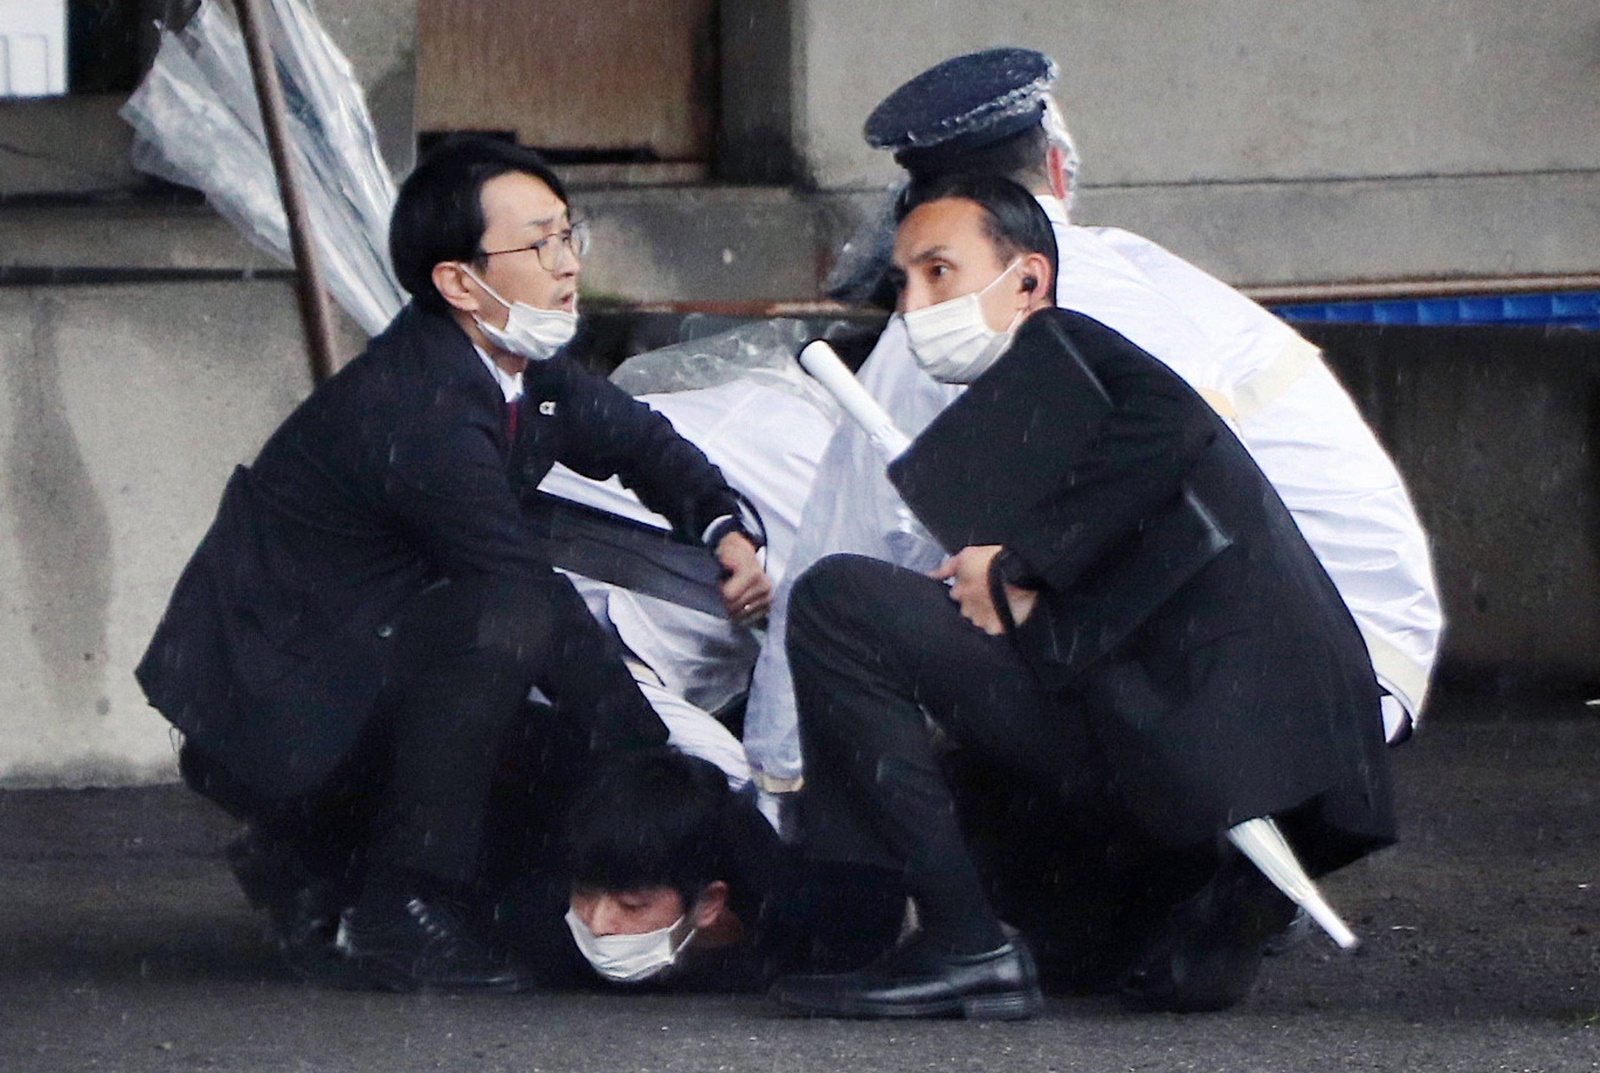 epa10573225 Police officers arrest a man suspected to have thrown explosives as Japanese Prime Minister Fumio Kishida was about to make a stump speech at a fishing port in Wakayama, Wakayama Prefecture, western Japan, 15 April 2023. A loud explosion was heard just before Kishida was set to speak. Kishida was not harmed in the explosion and police forces arrested the suspect believed to have thrown the explosive.  EPA/JIJI PRESS JAPAN OUT EDITORIAL USE ONLY / ALTERNATE CROP